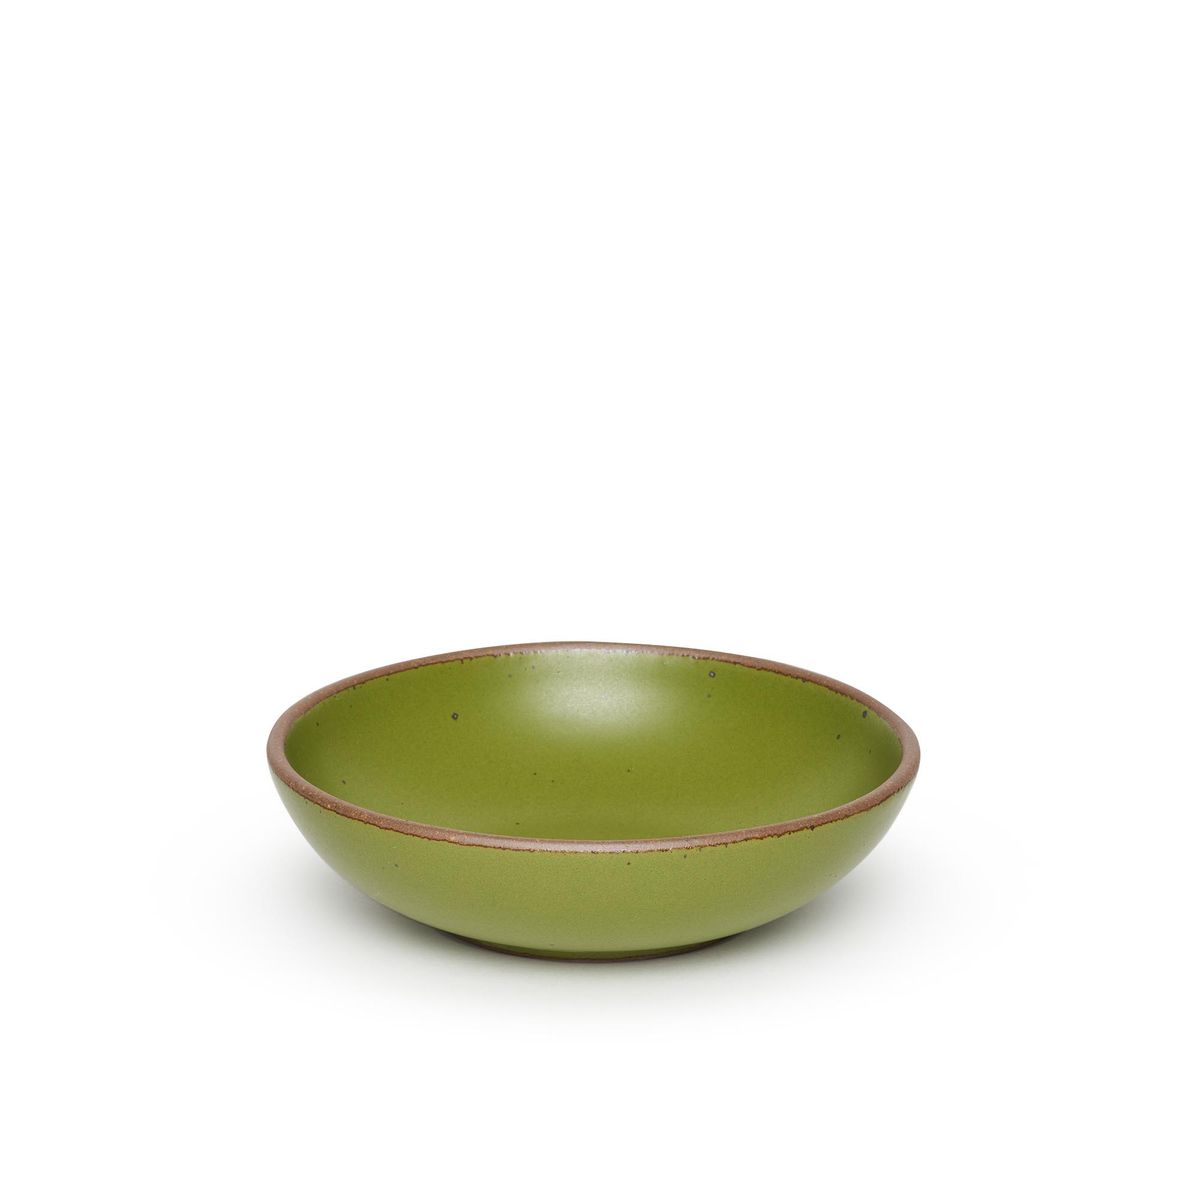 The Everyday Bowl in Fiddlehead, a mossy, olive green.